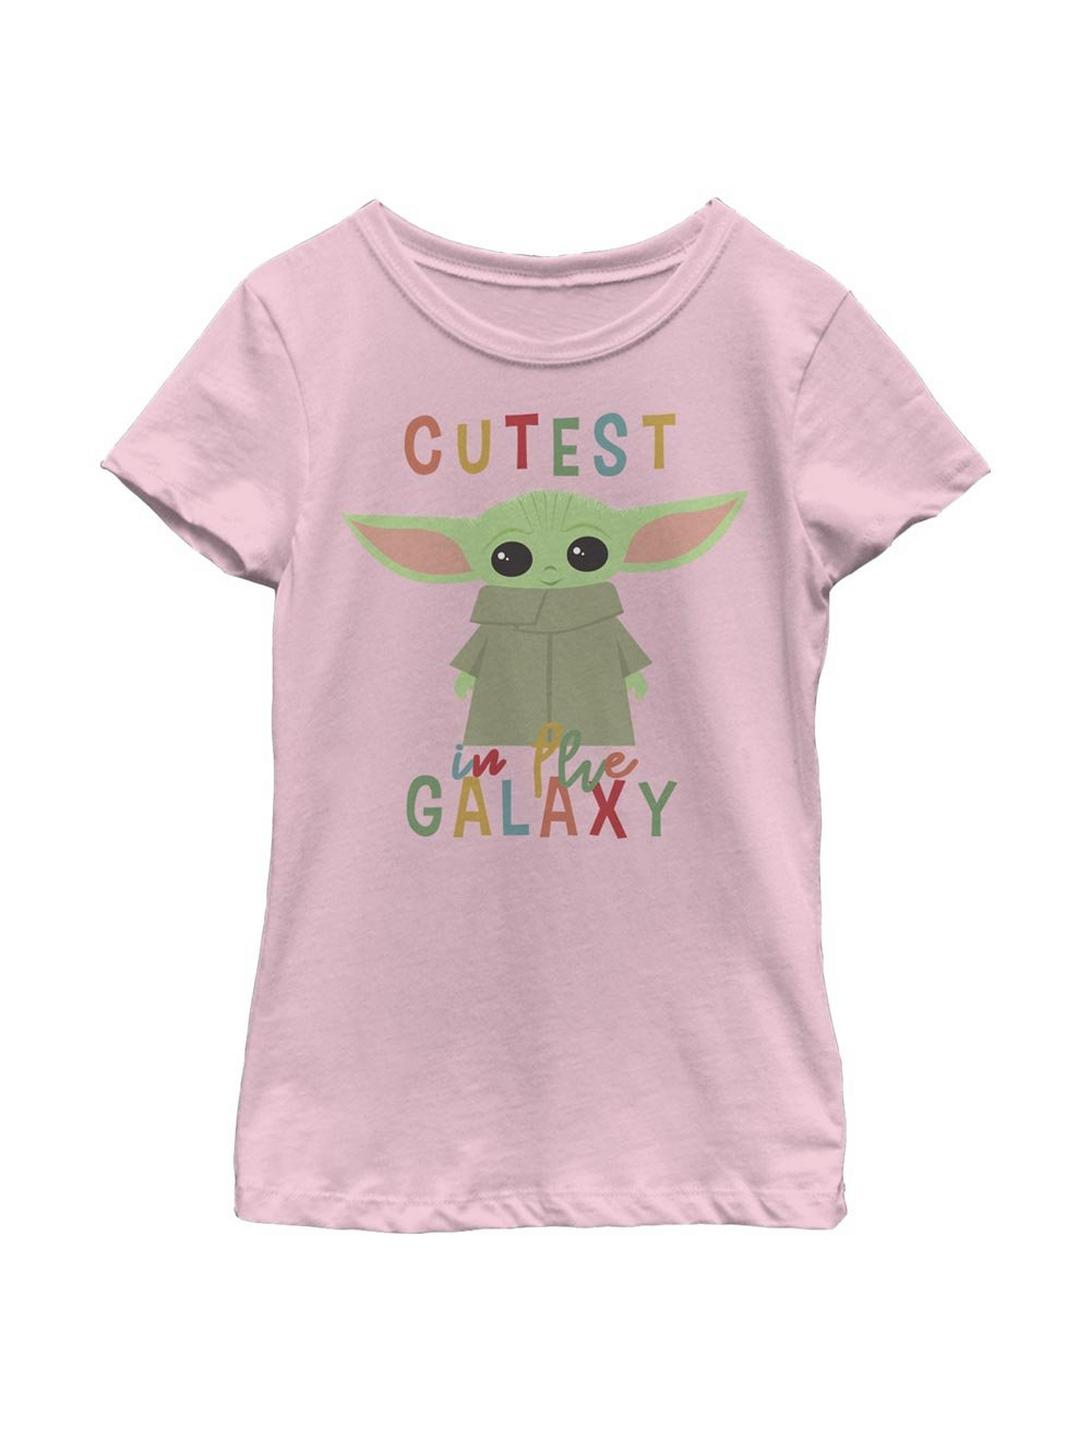 Star Wars The Mandalorian The Child Cutest Little Child Youth Girls T-Shirt, PINK, hi-res